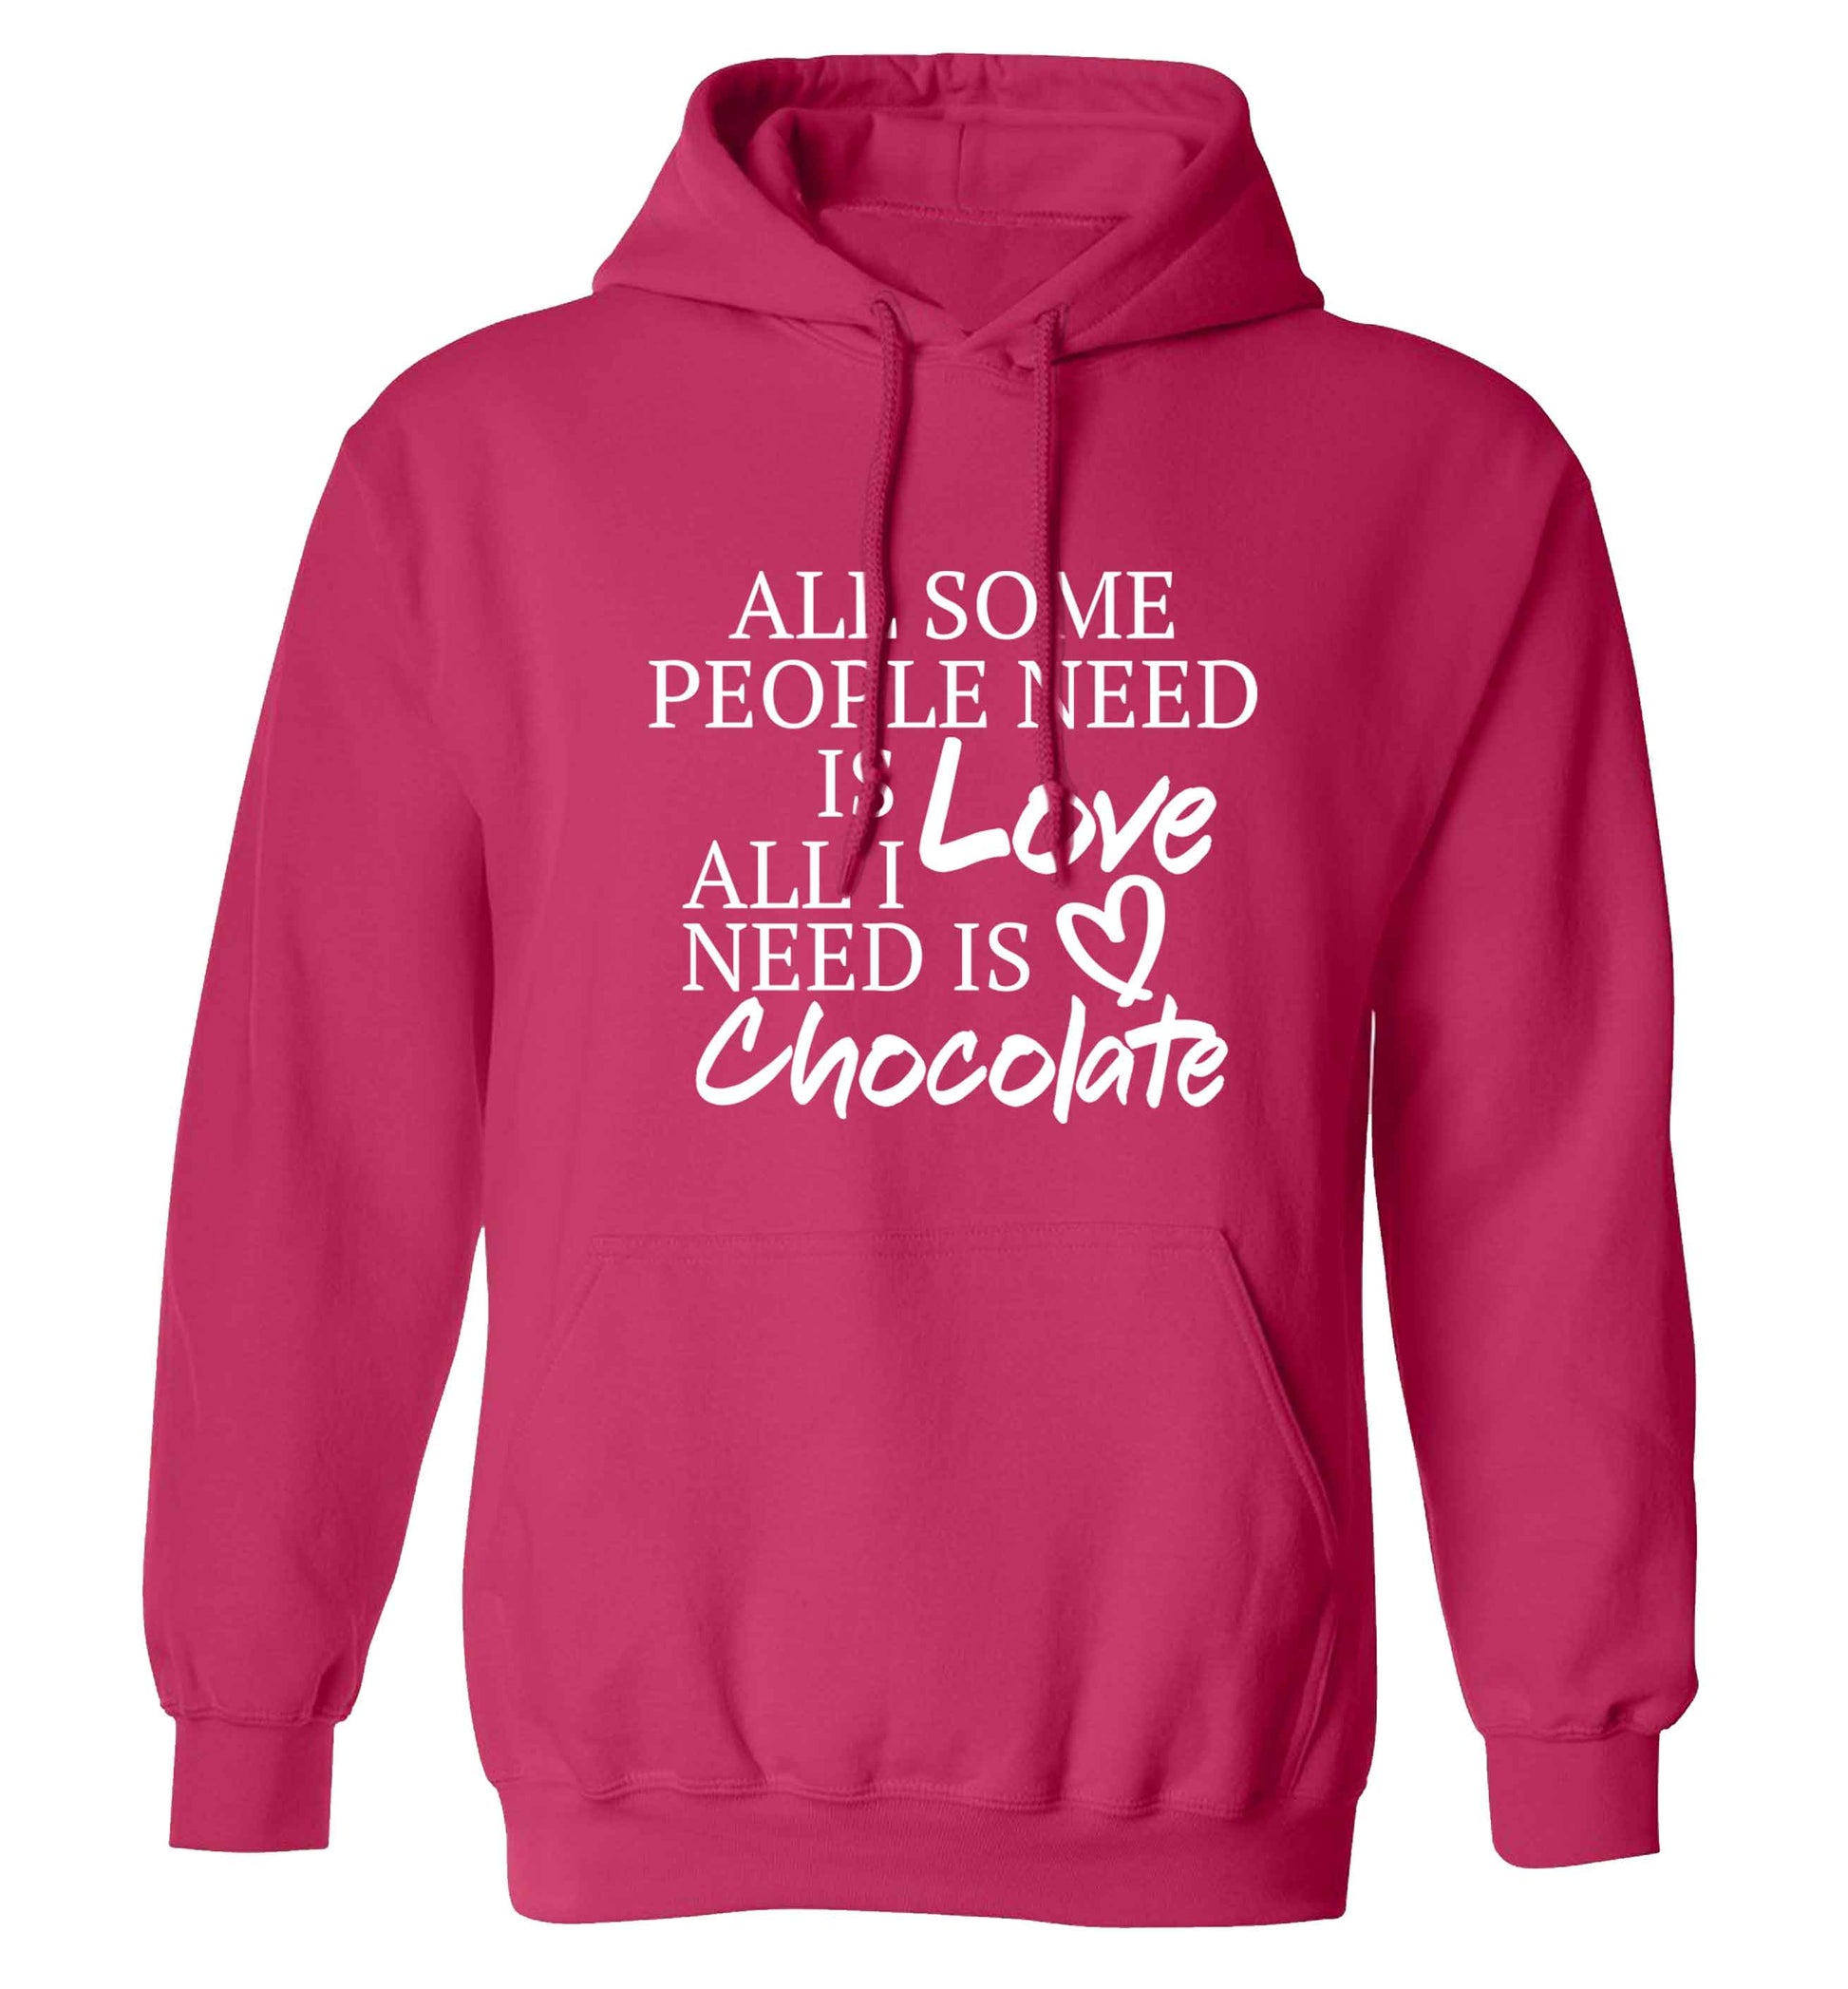 All some people need is love all I need is chocolate adults unisex pink hoodie 2XL